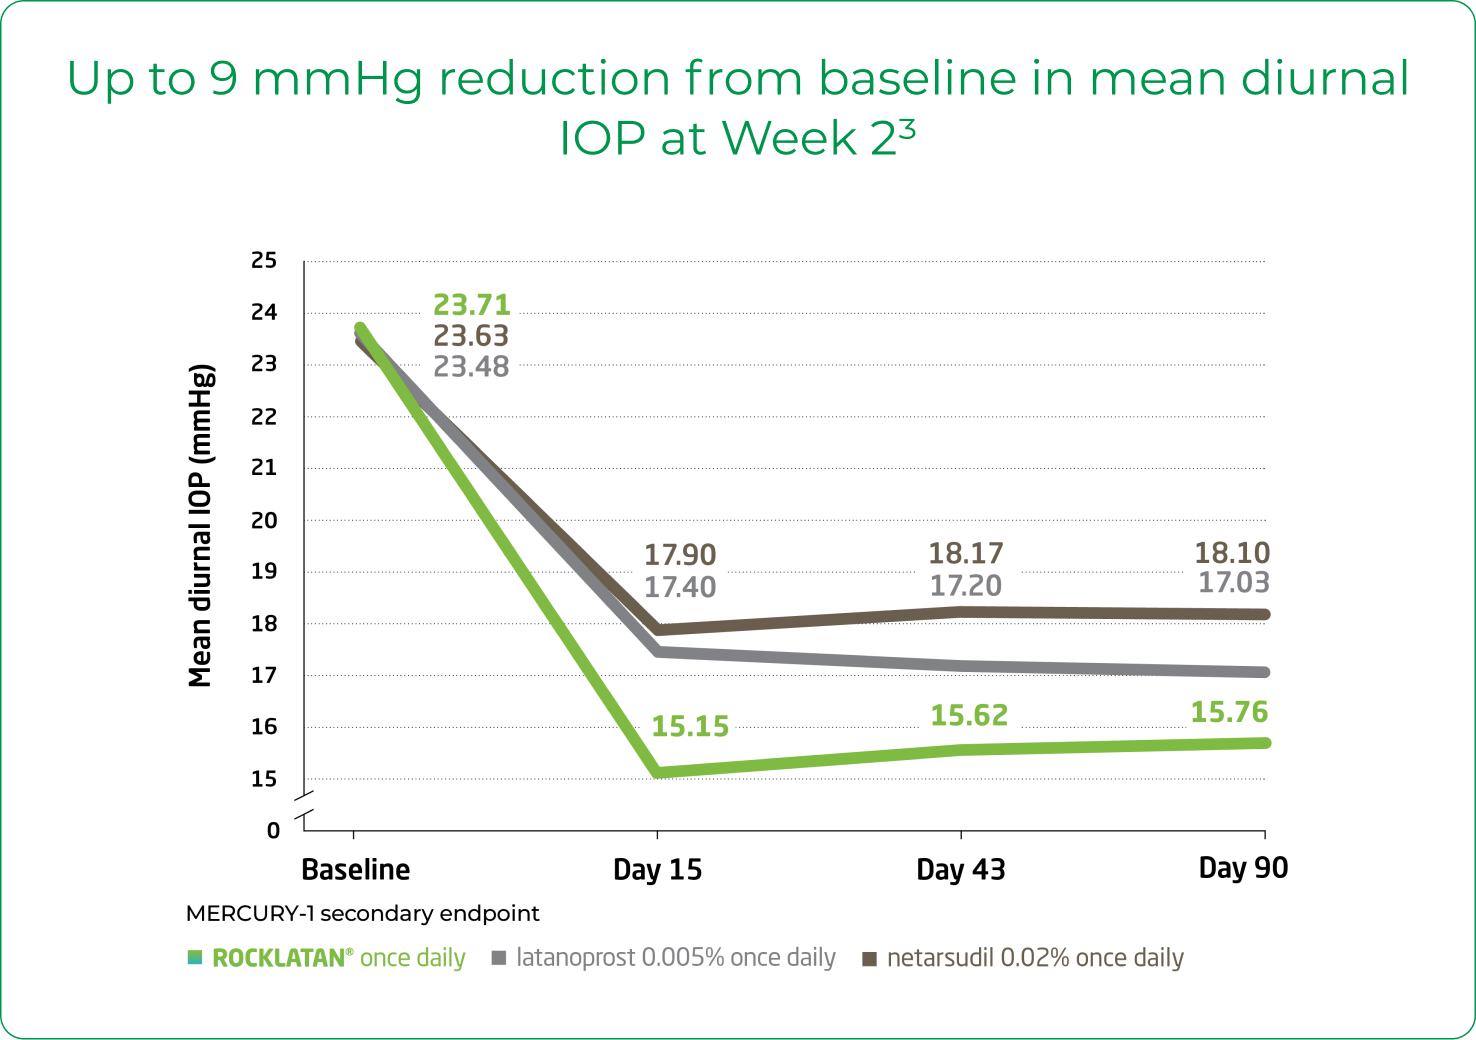 Up to 9 mmHg reduction from baseline in mean diurnal IOP at Week 2